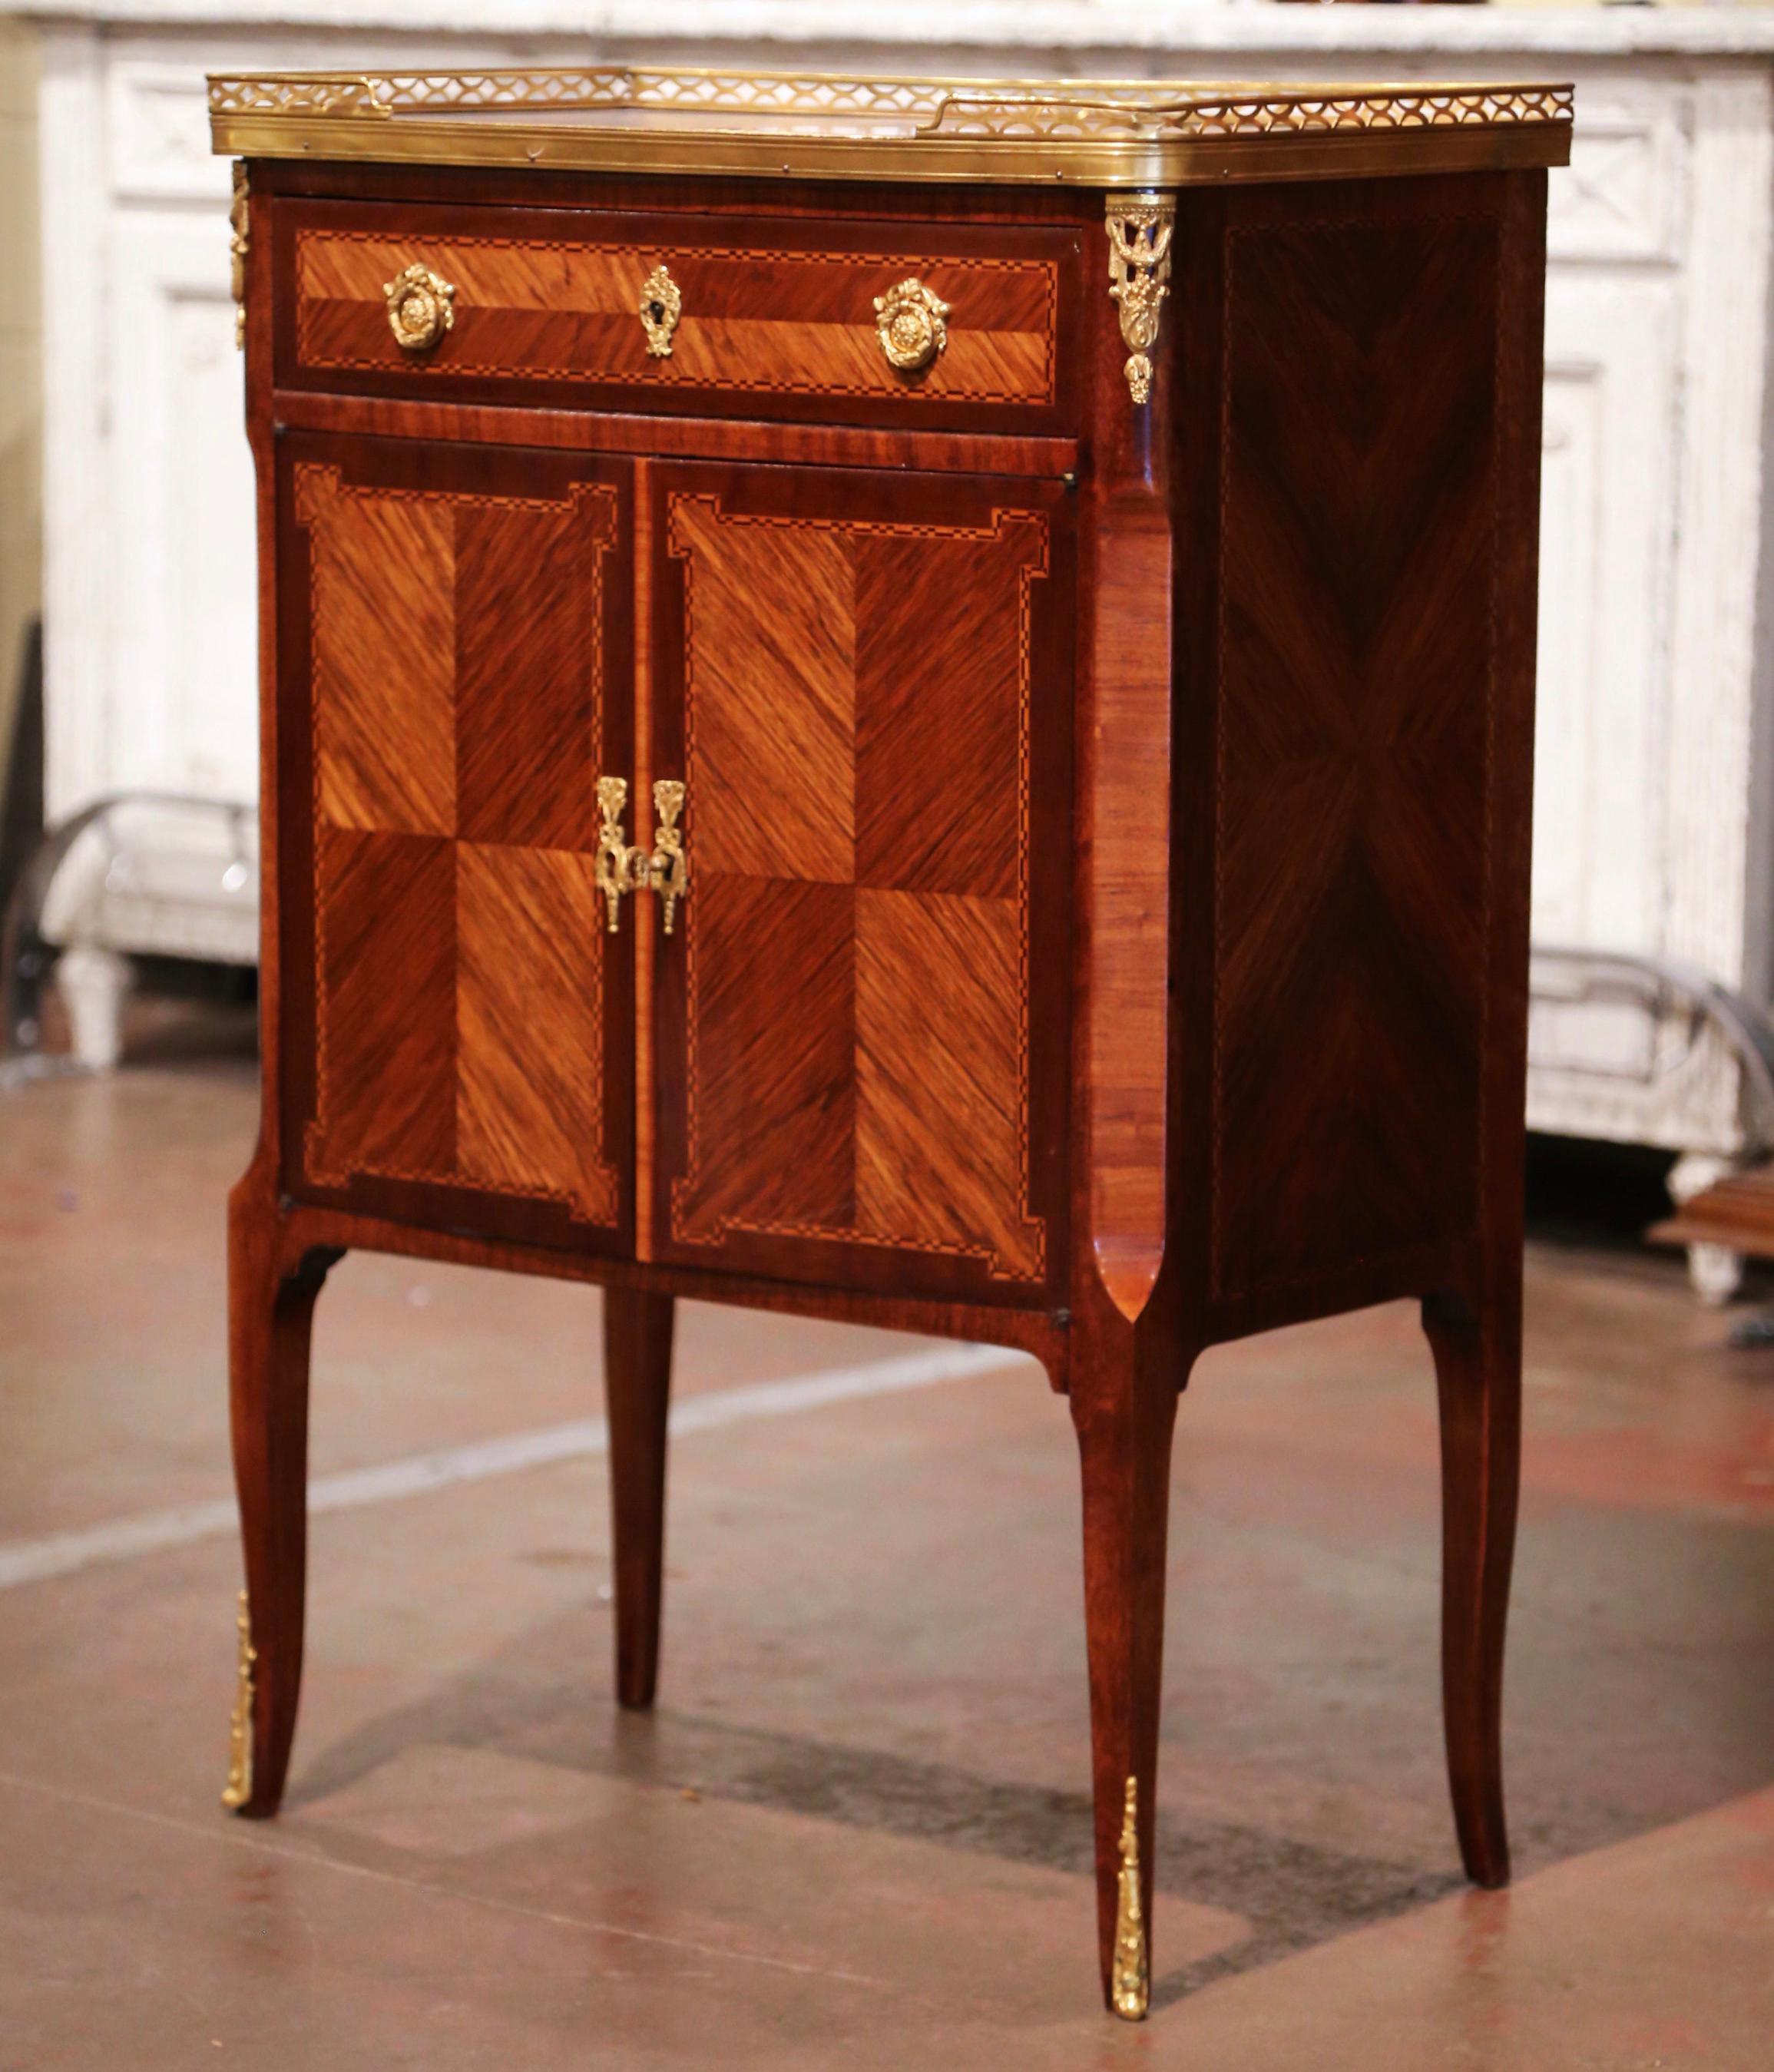 Decorate a living room or bedroom with this elegant antique cabinet. Crafted in Paris, France circa 1920, the fruit wood chest stands on cabriole legs ending with bronze sabots. The cabinet with marquetry and parquetry motifs, features a large